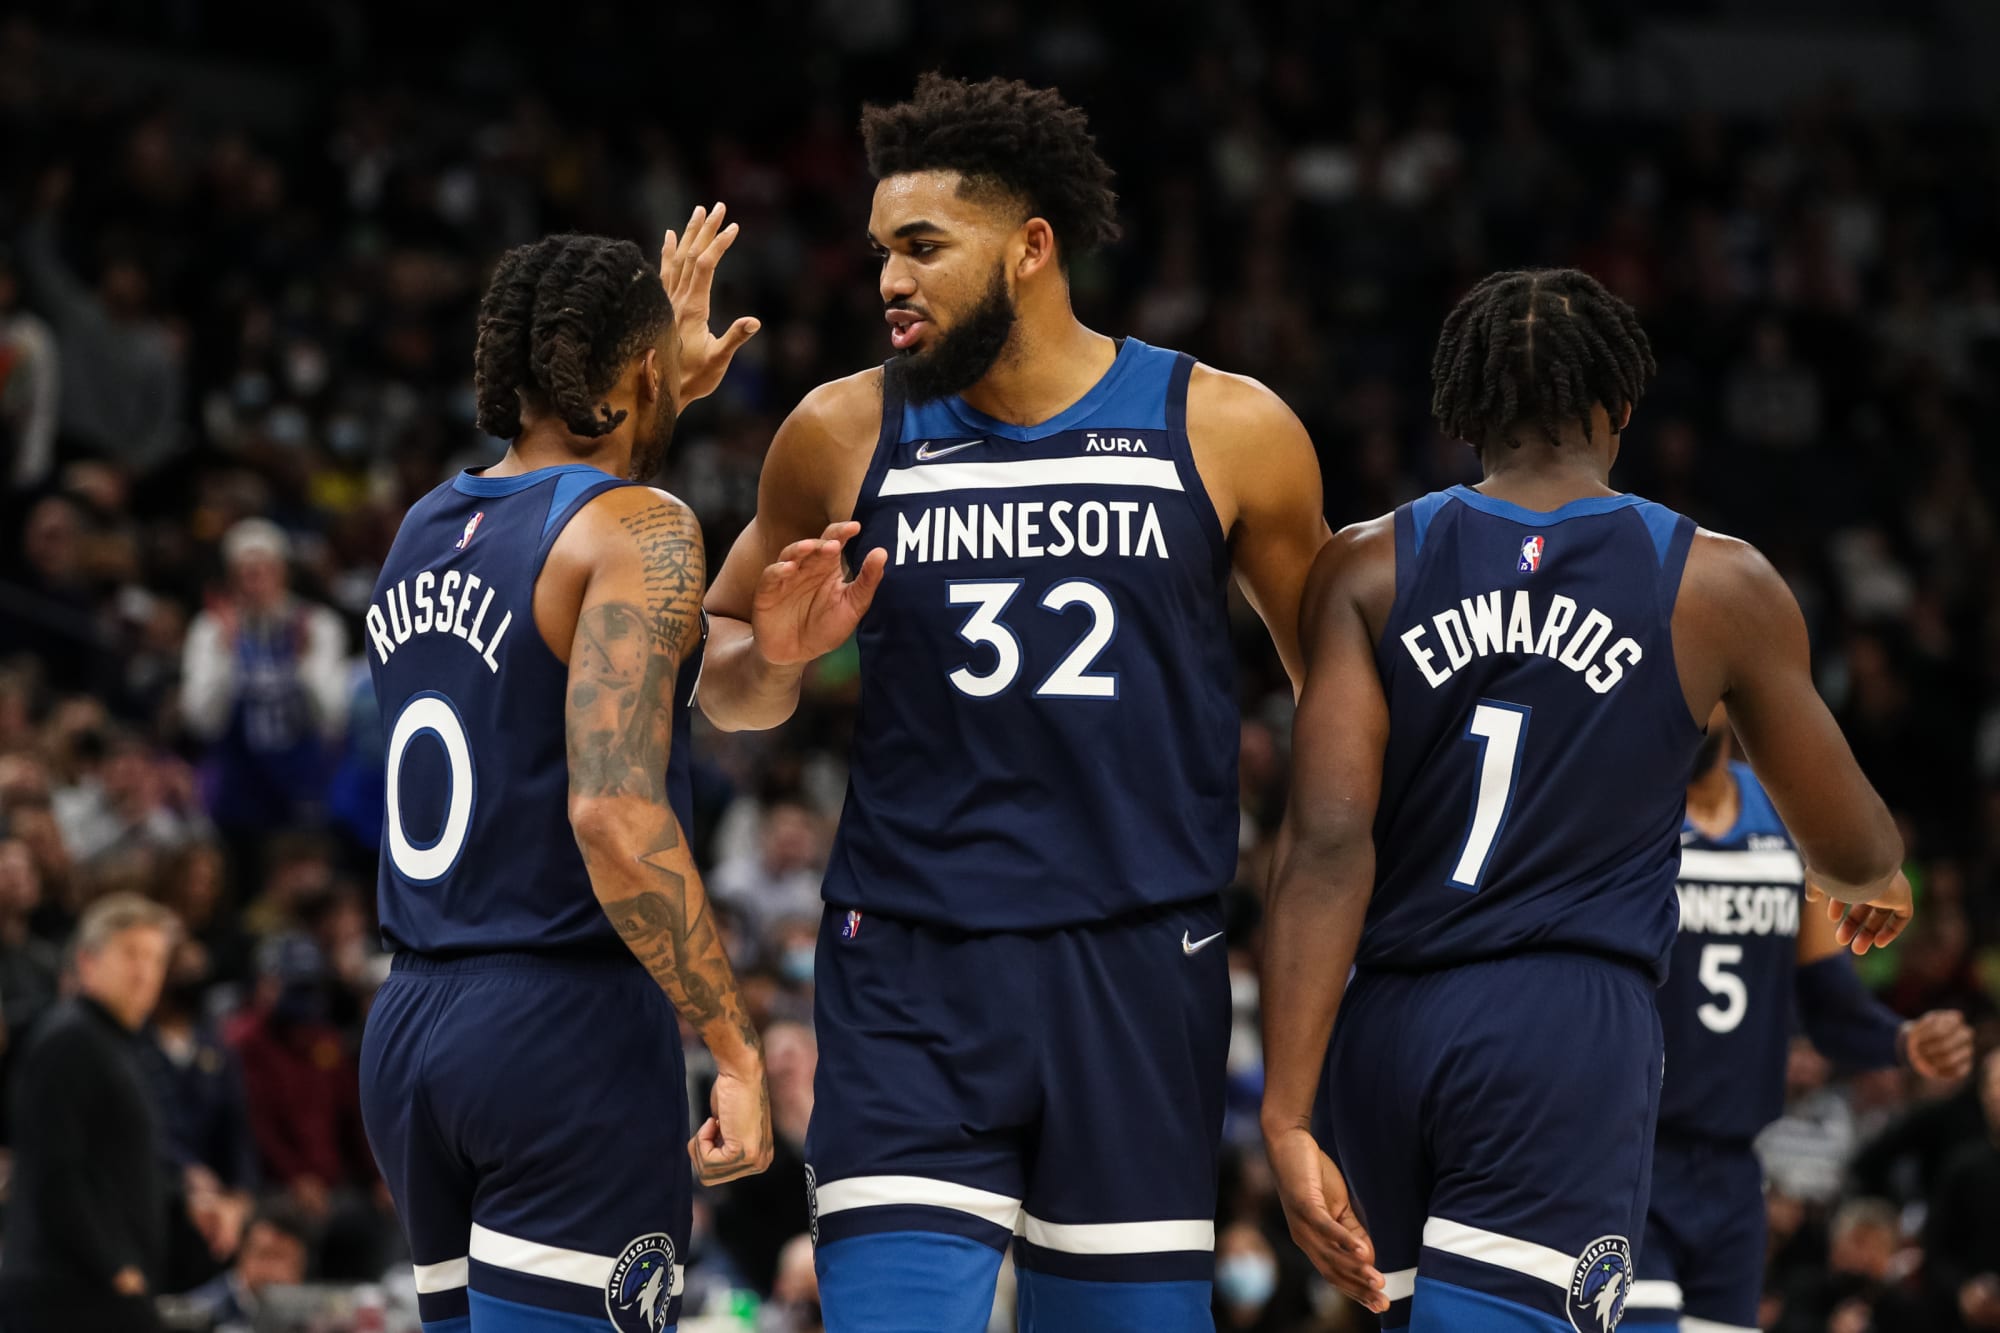 ESPN Timberwolves have lost fourthmost value due to COVID